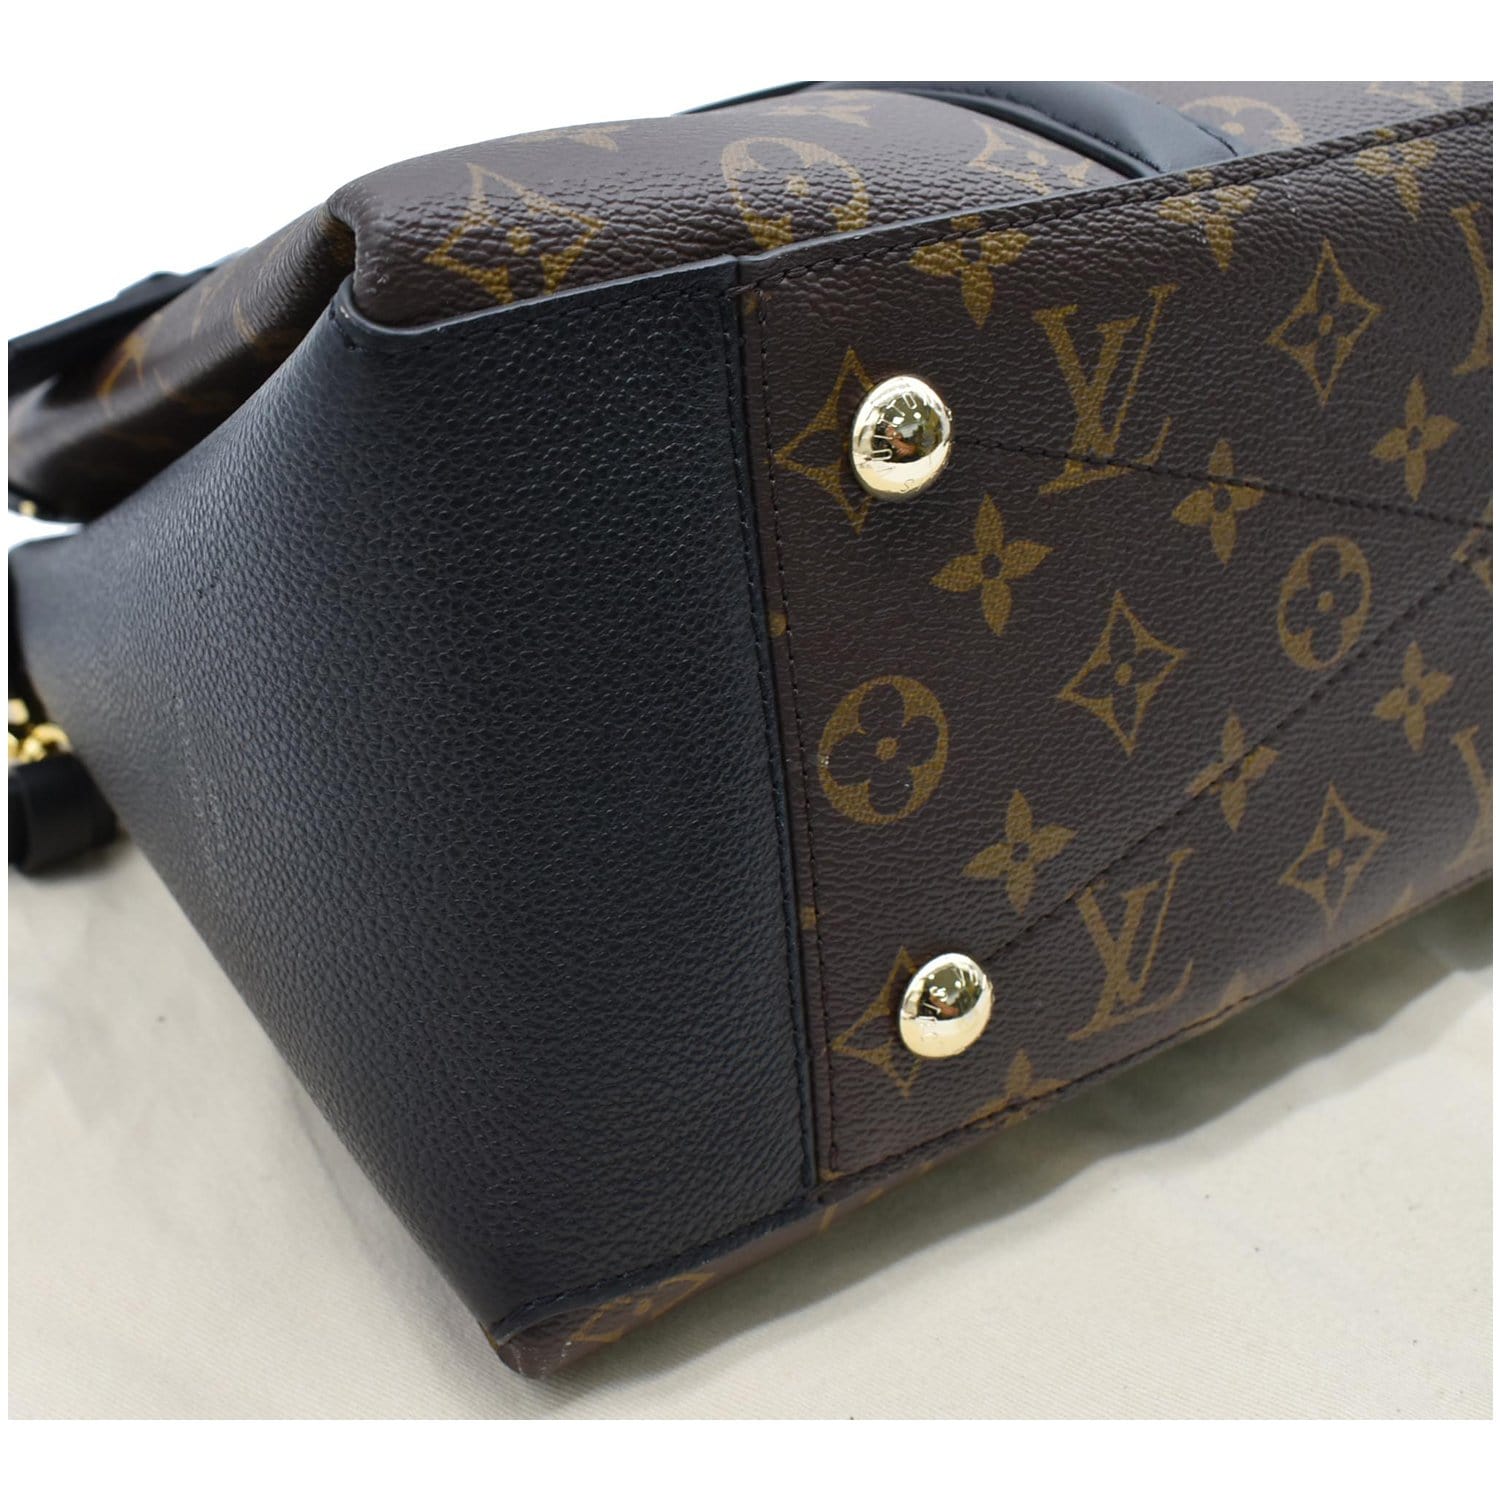 Louis Vuitton Soufflot Tote Monogram Canvas with Leather MM Noir, New -  $2466 - From Jeneration